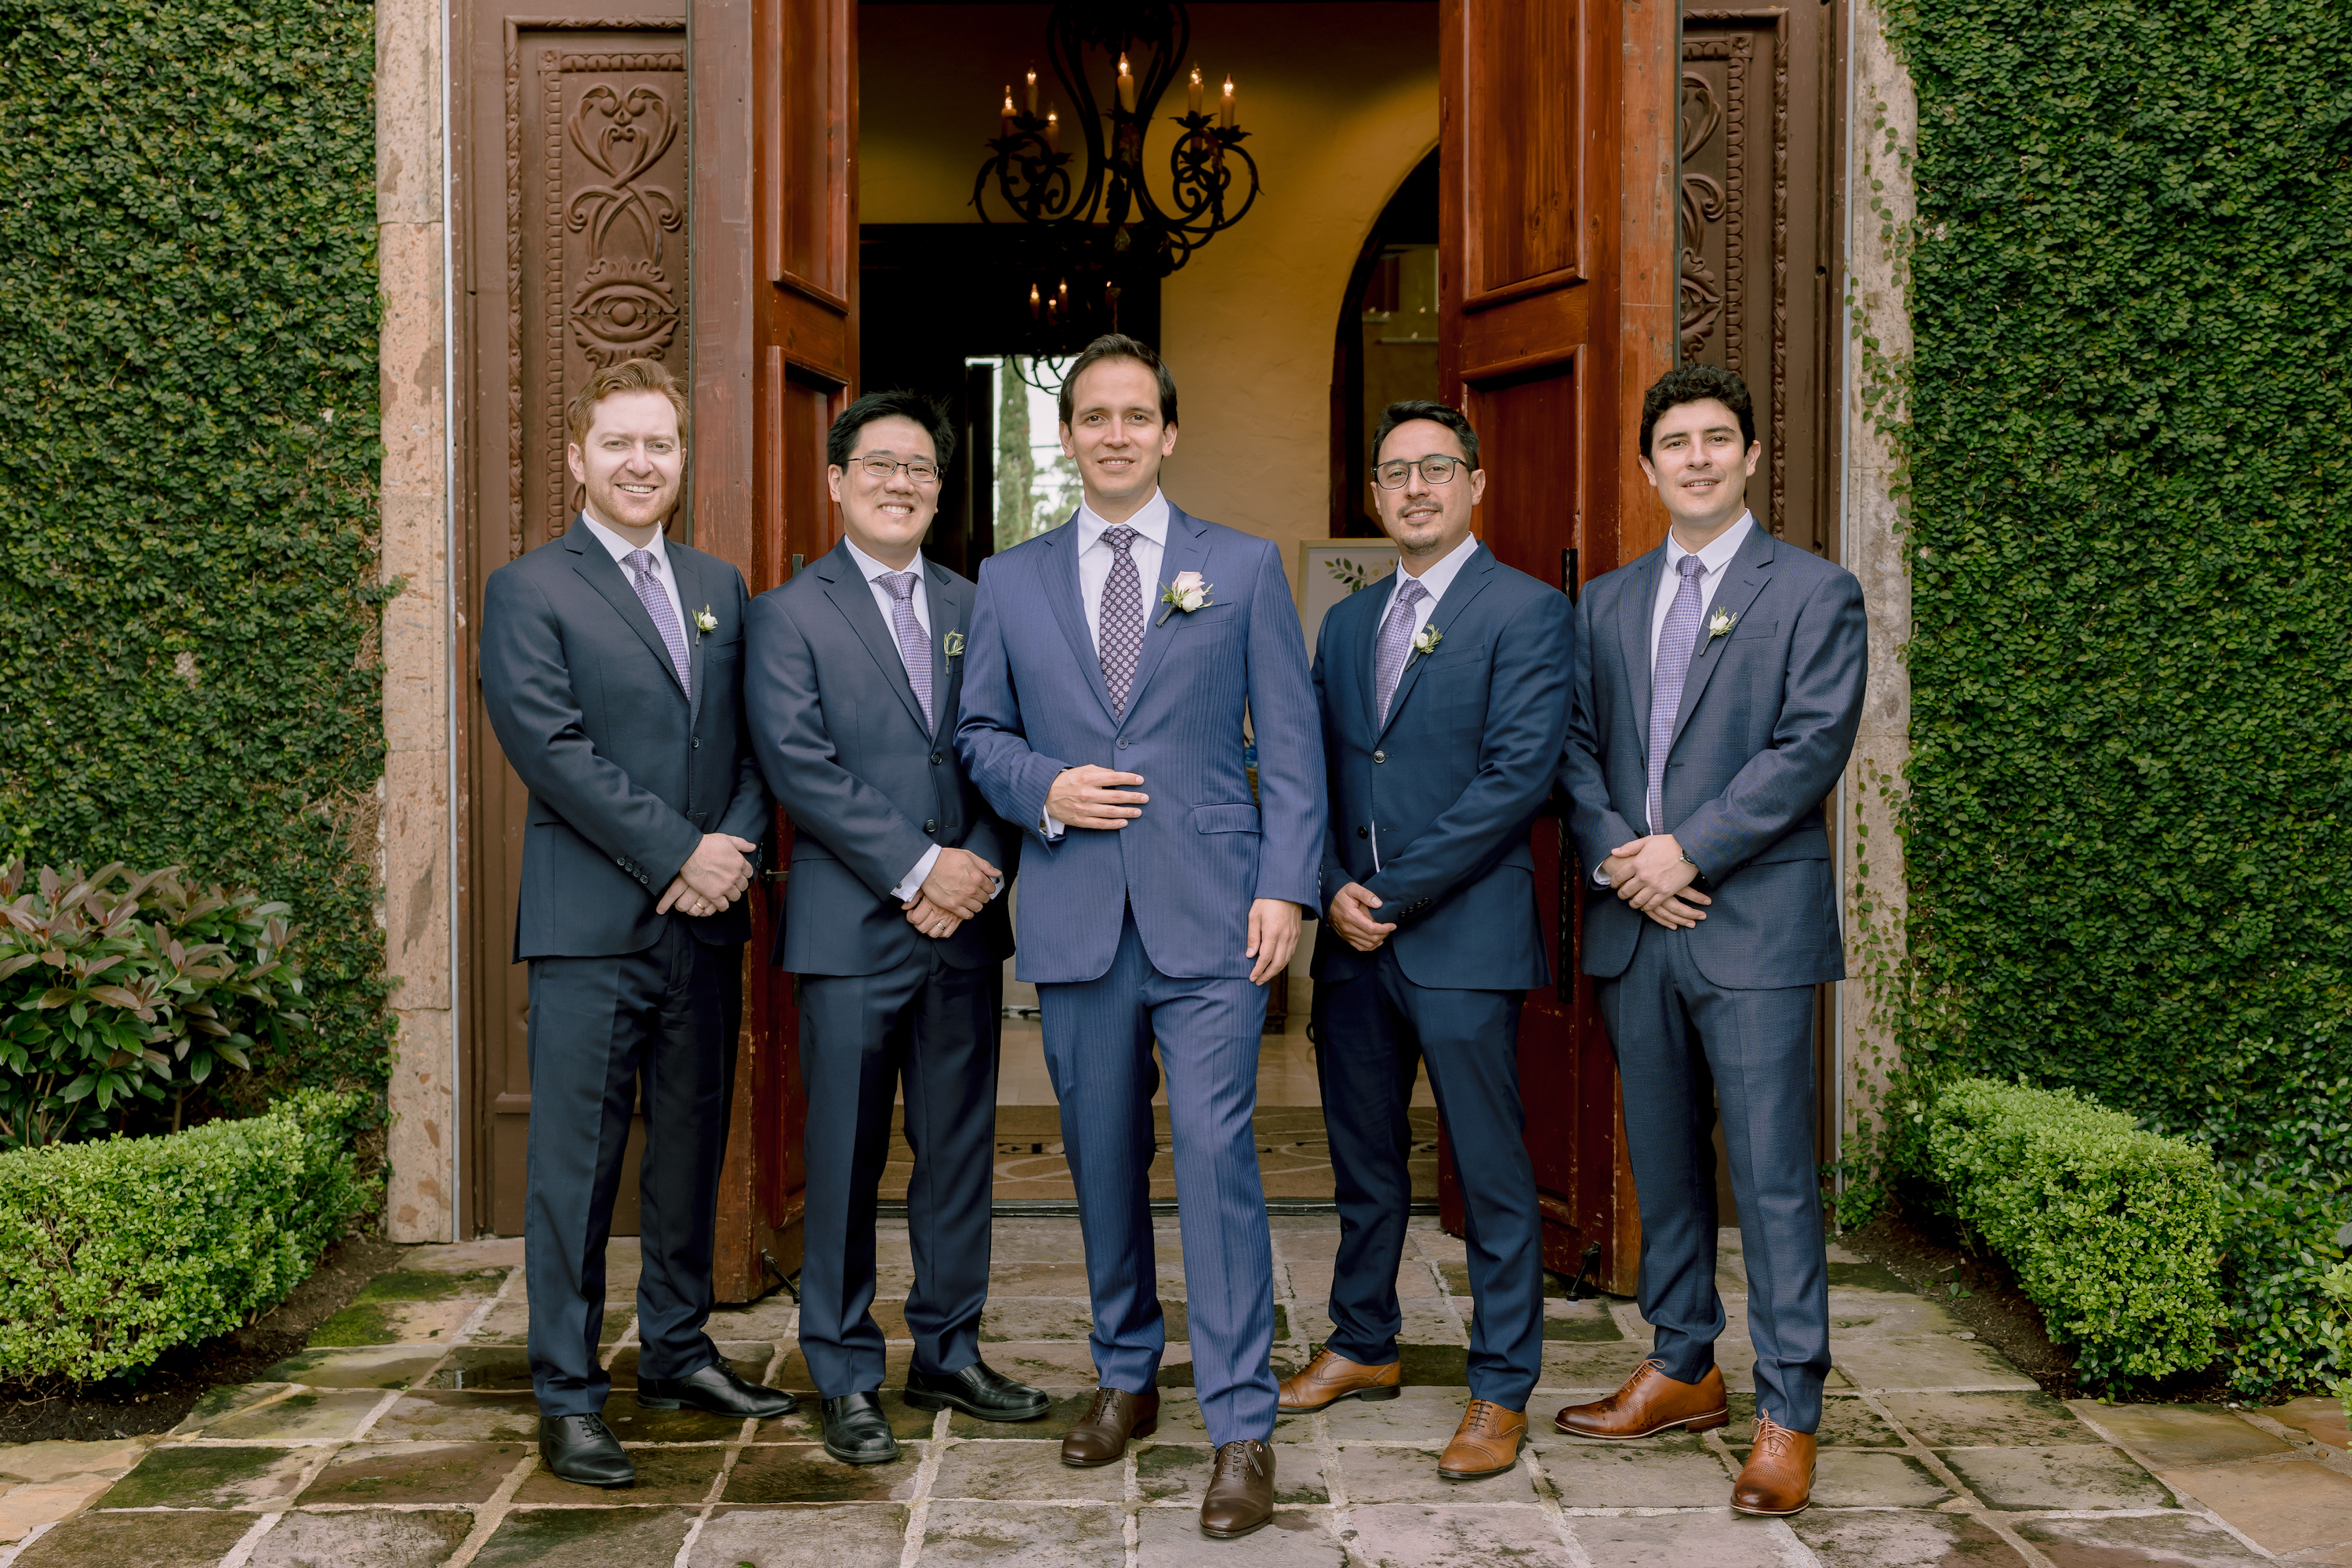 The groom and groomsmen pose in front of the venue entrance.